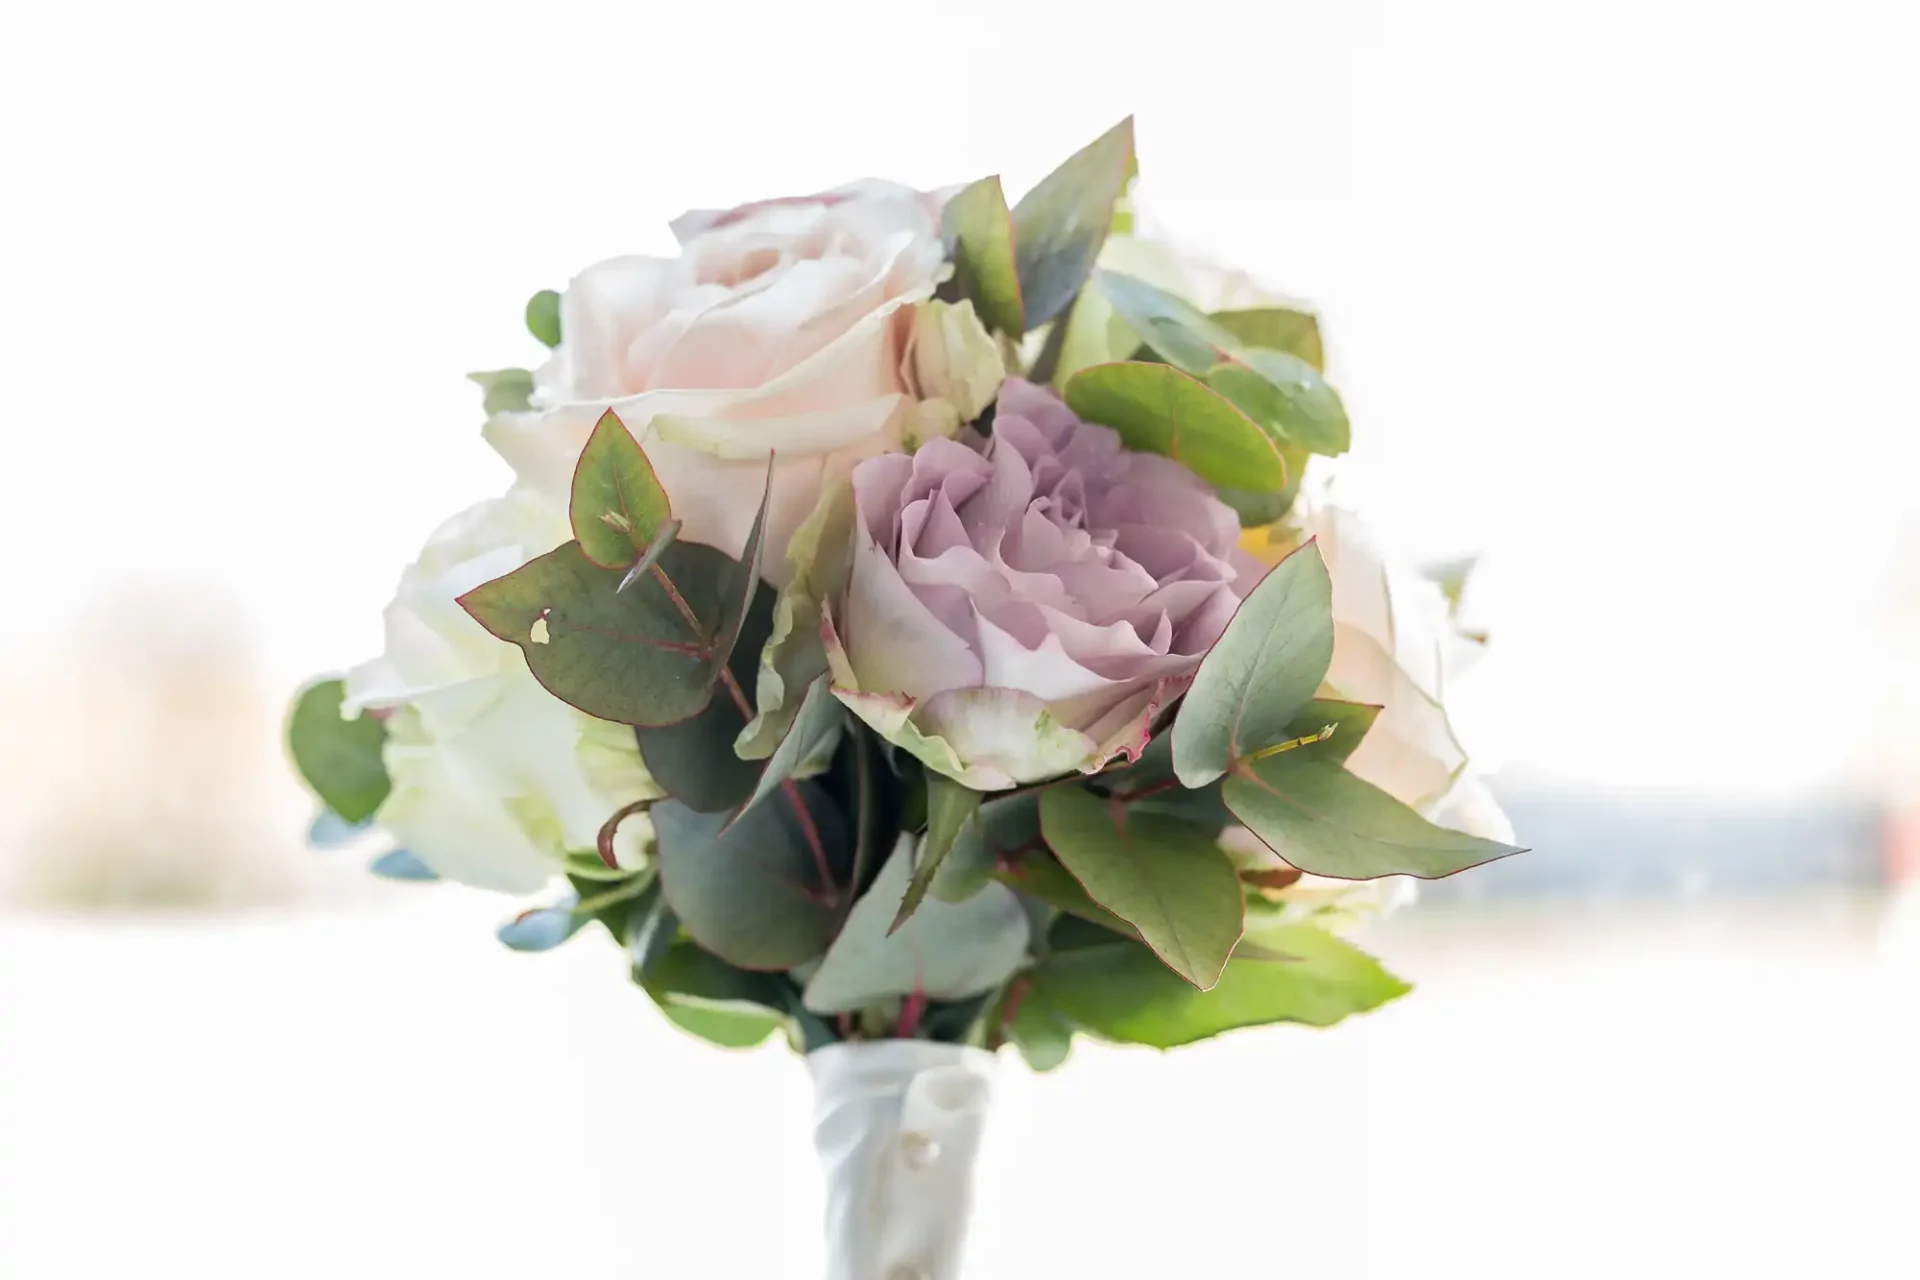 A bridal bouquet featuring pale pink roses and a single purple flower, surrounded by green leaves and wrapped with a white ribbon.